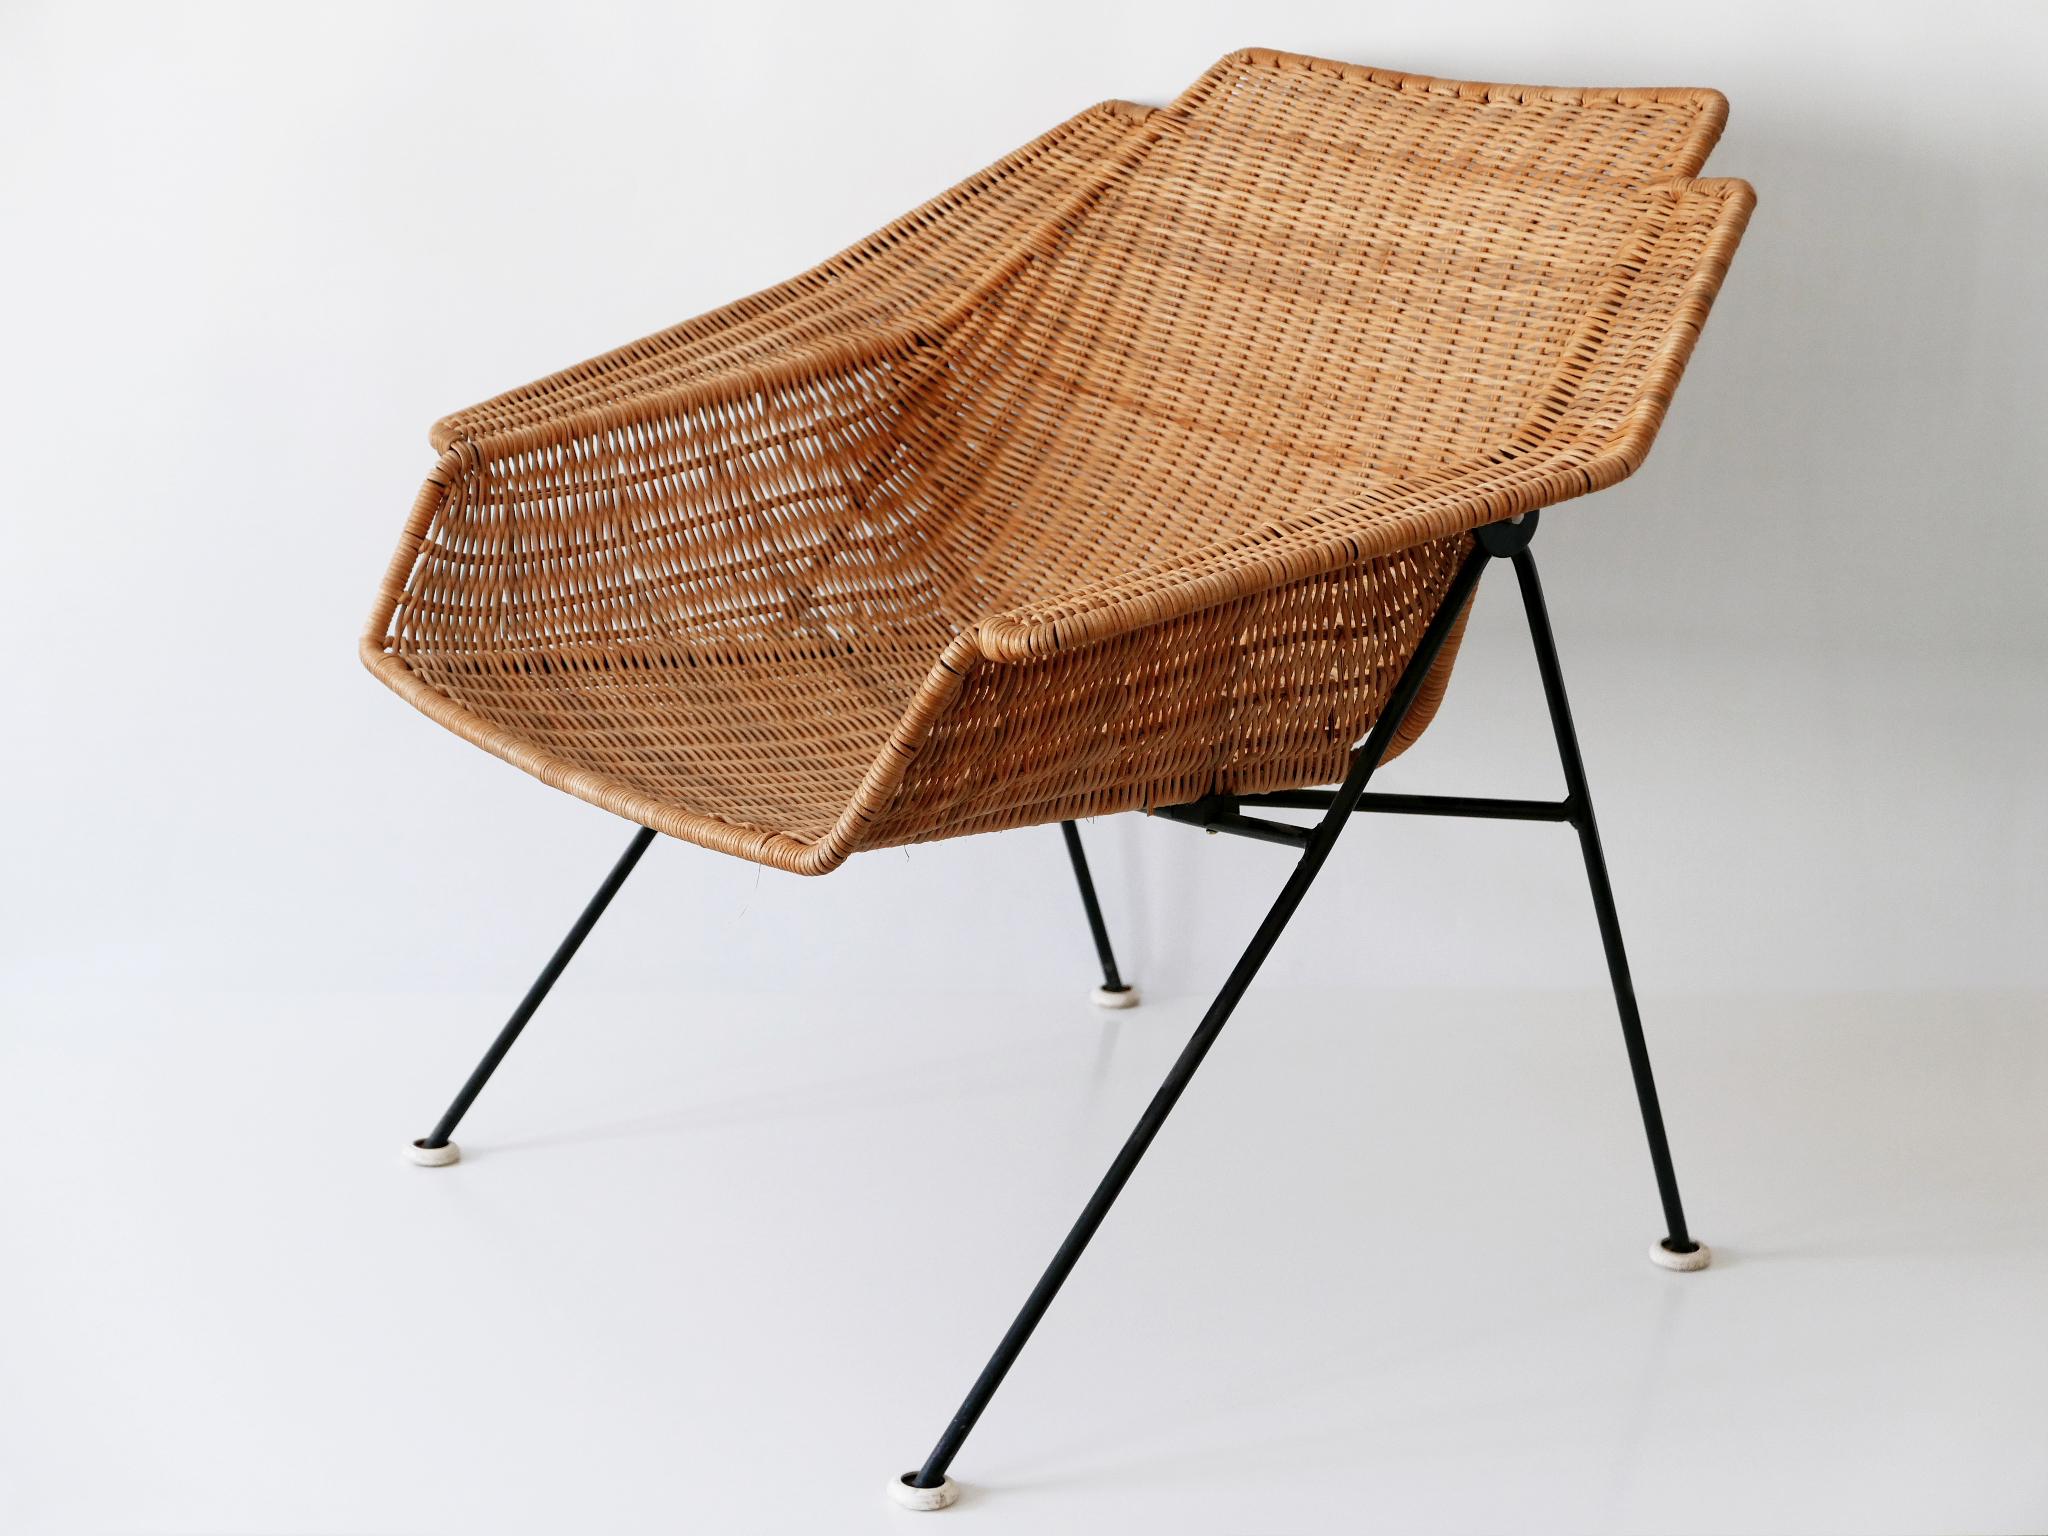 Extremely rare, large and decorative Mid-Century Modern wicker lounge chair or armchair. Designed and manufactured probably in 1950s, Sweden.

The chair is executed in wicker and metal. 

Good vintage condition. Wear consistent with use and age.